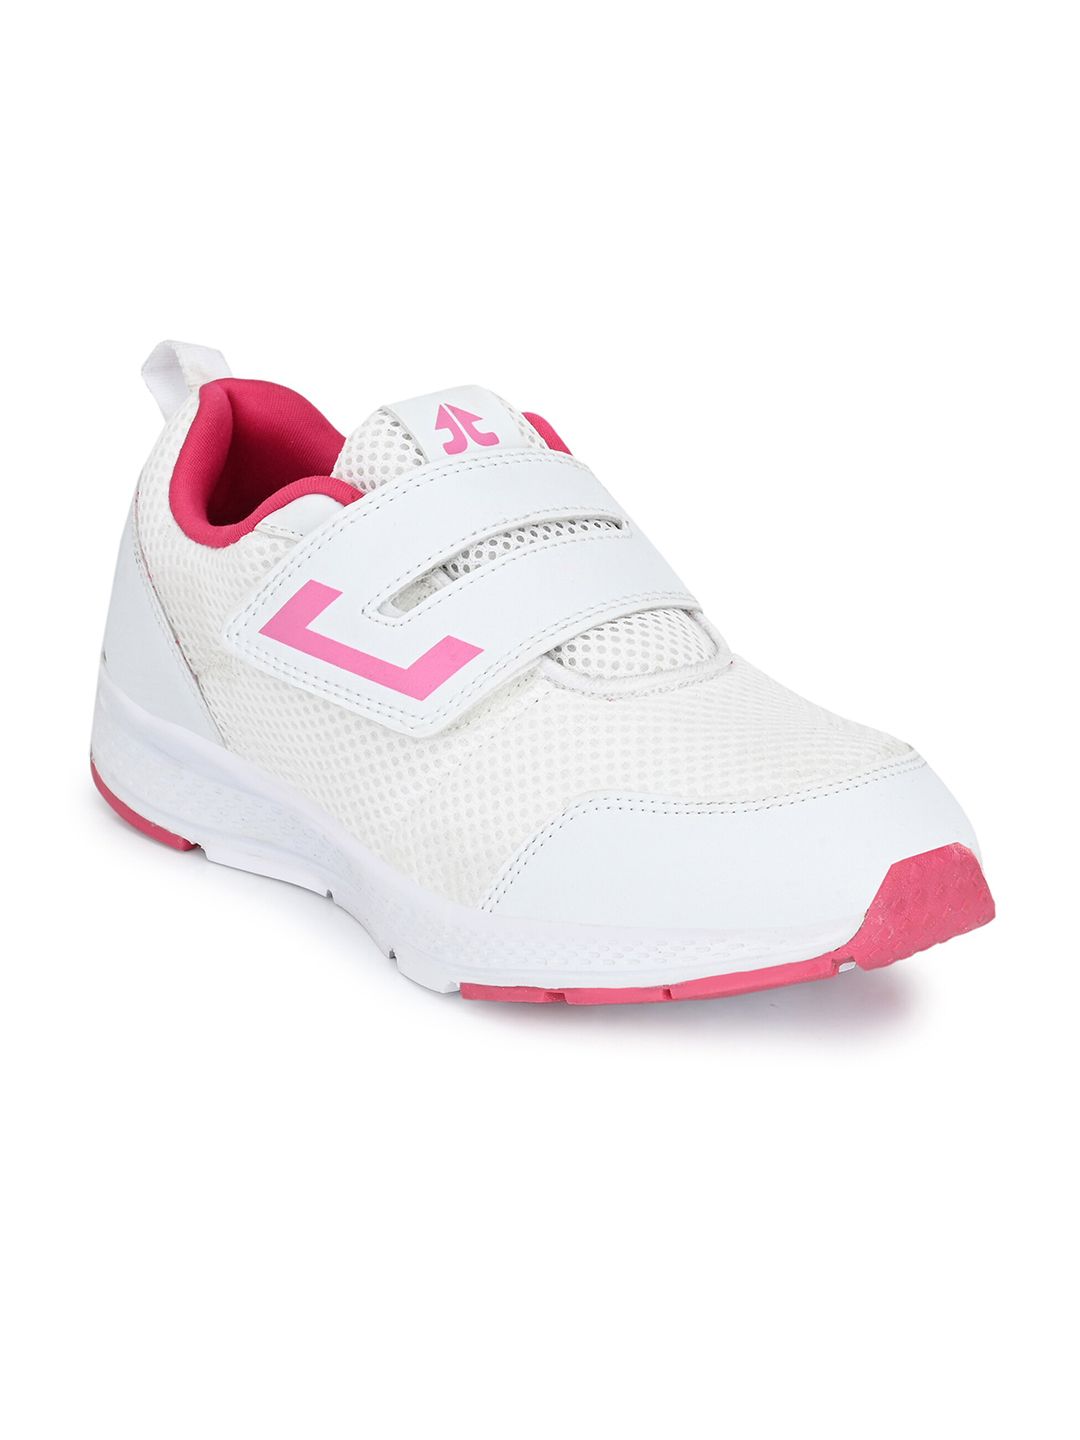 OFF LIMITS Women White & Pink Mesh Walking Non-Marking Shoes Price in India